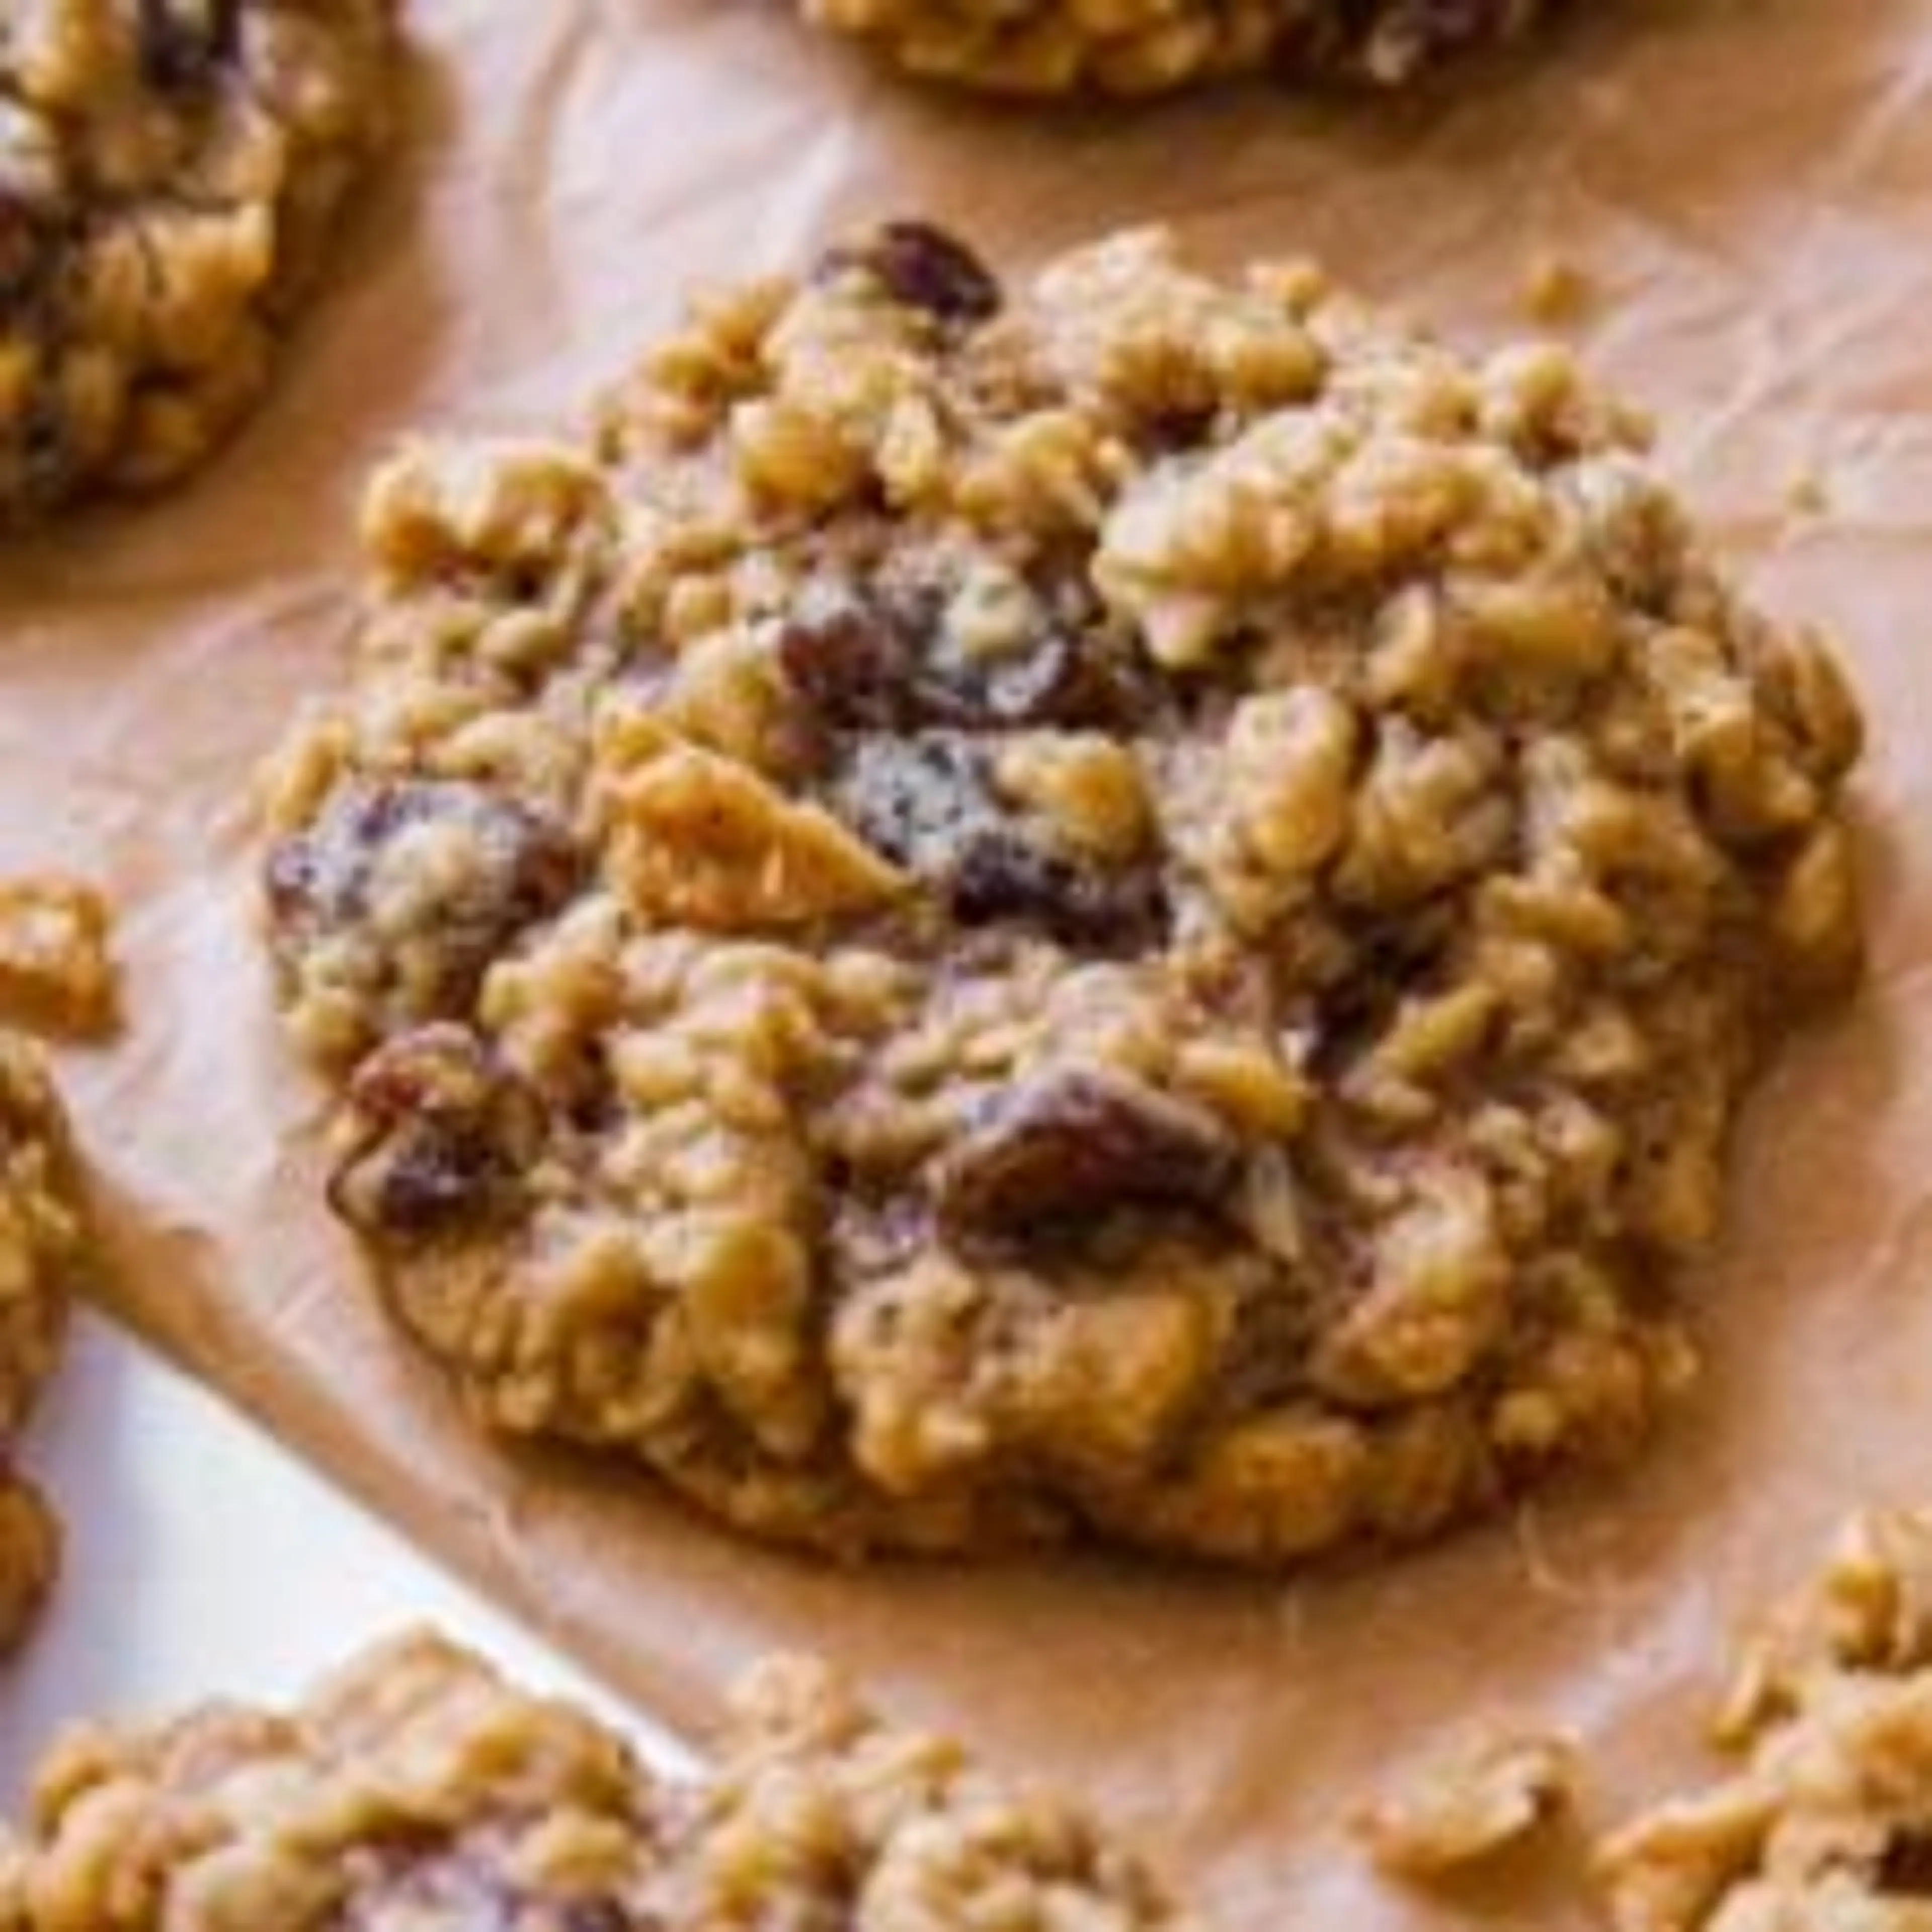 Soft and Chewy Oatmeal Raisin Cookies